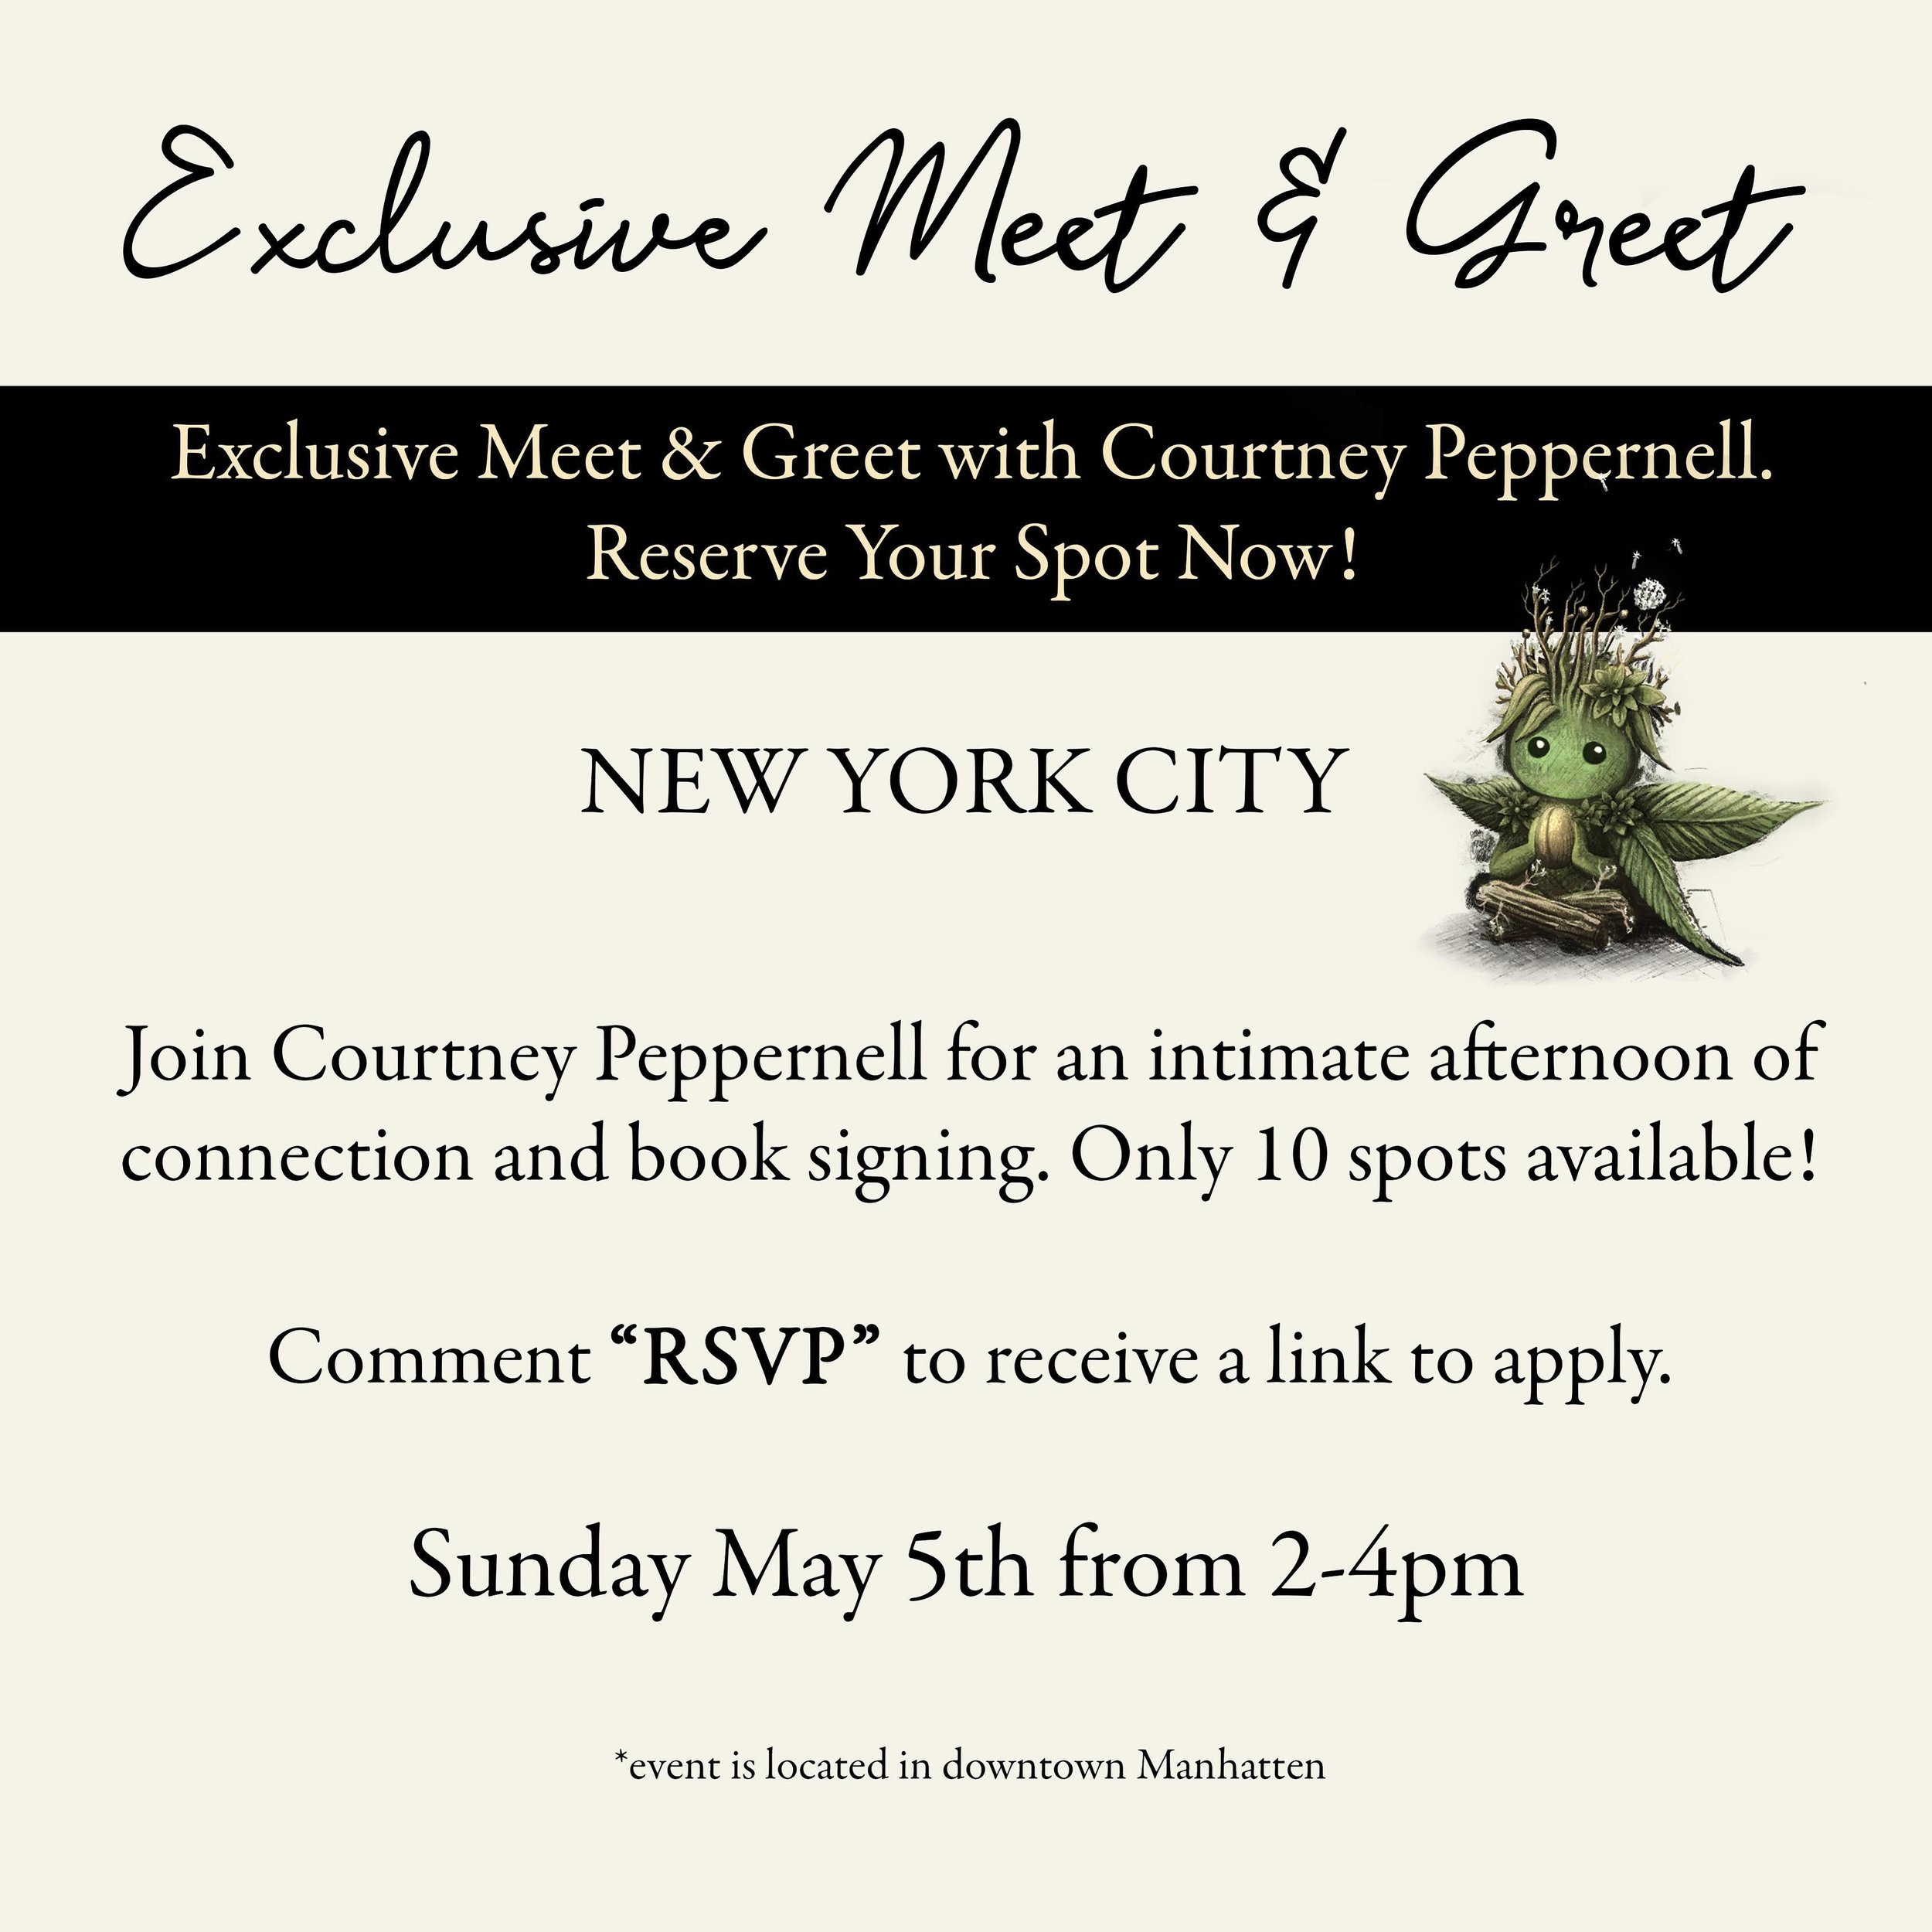 Exclusive Meet &amp; Greet with Courtney Peppernell in NYC! 🪼comment RSVP below or click the link in my stories to enter 🪼
.
.
10 people will be selected and contacted to join for an intimate gathering with best-selling author, Courtney Peppernell 